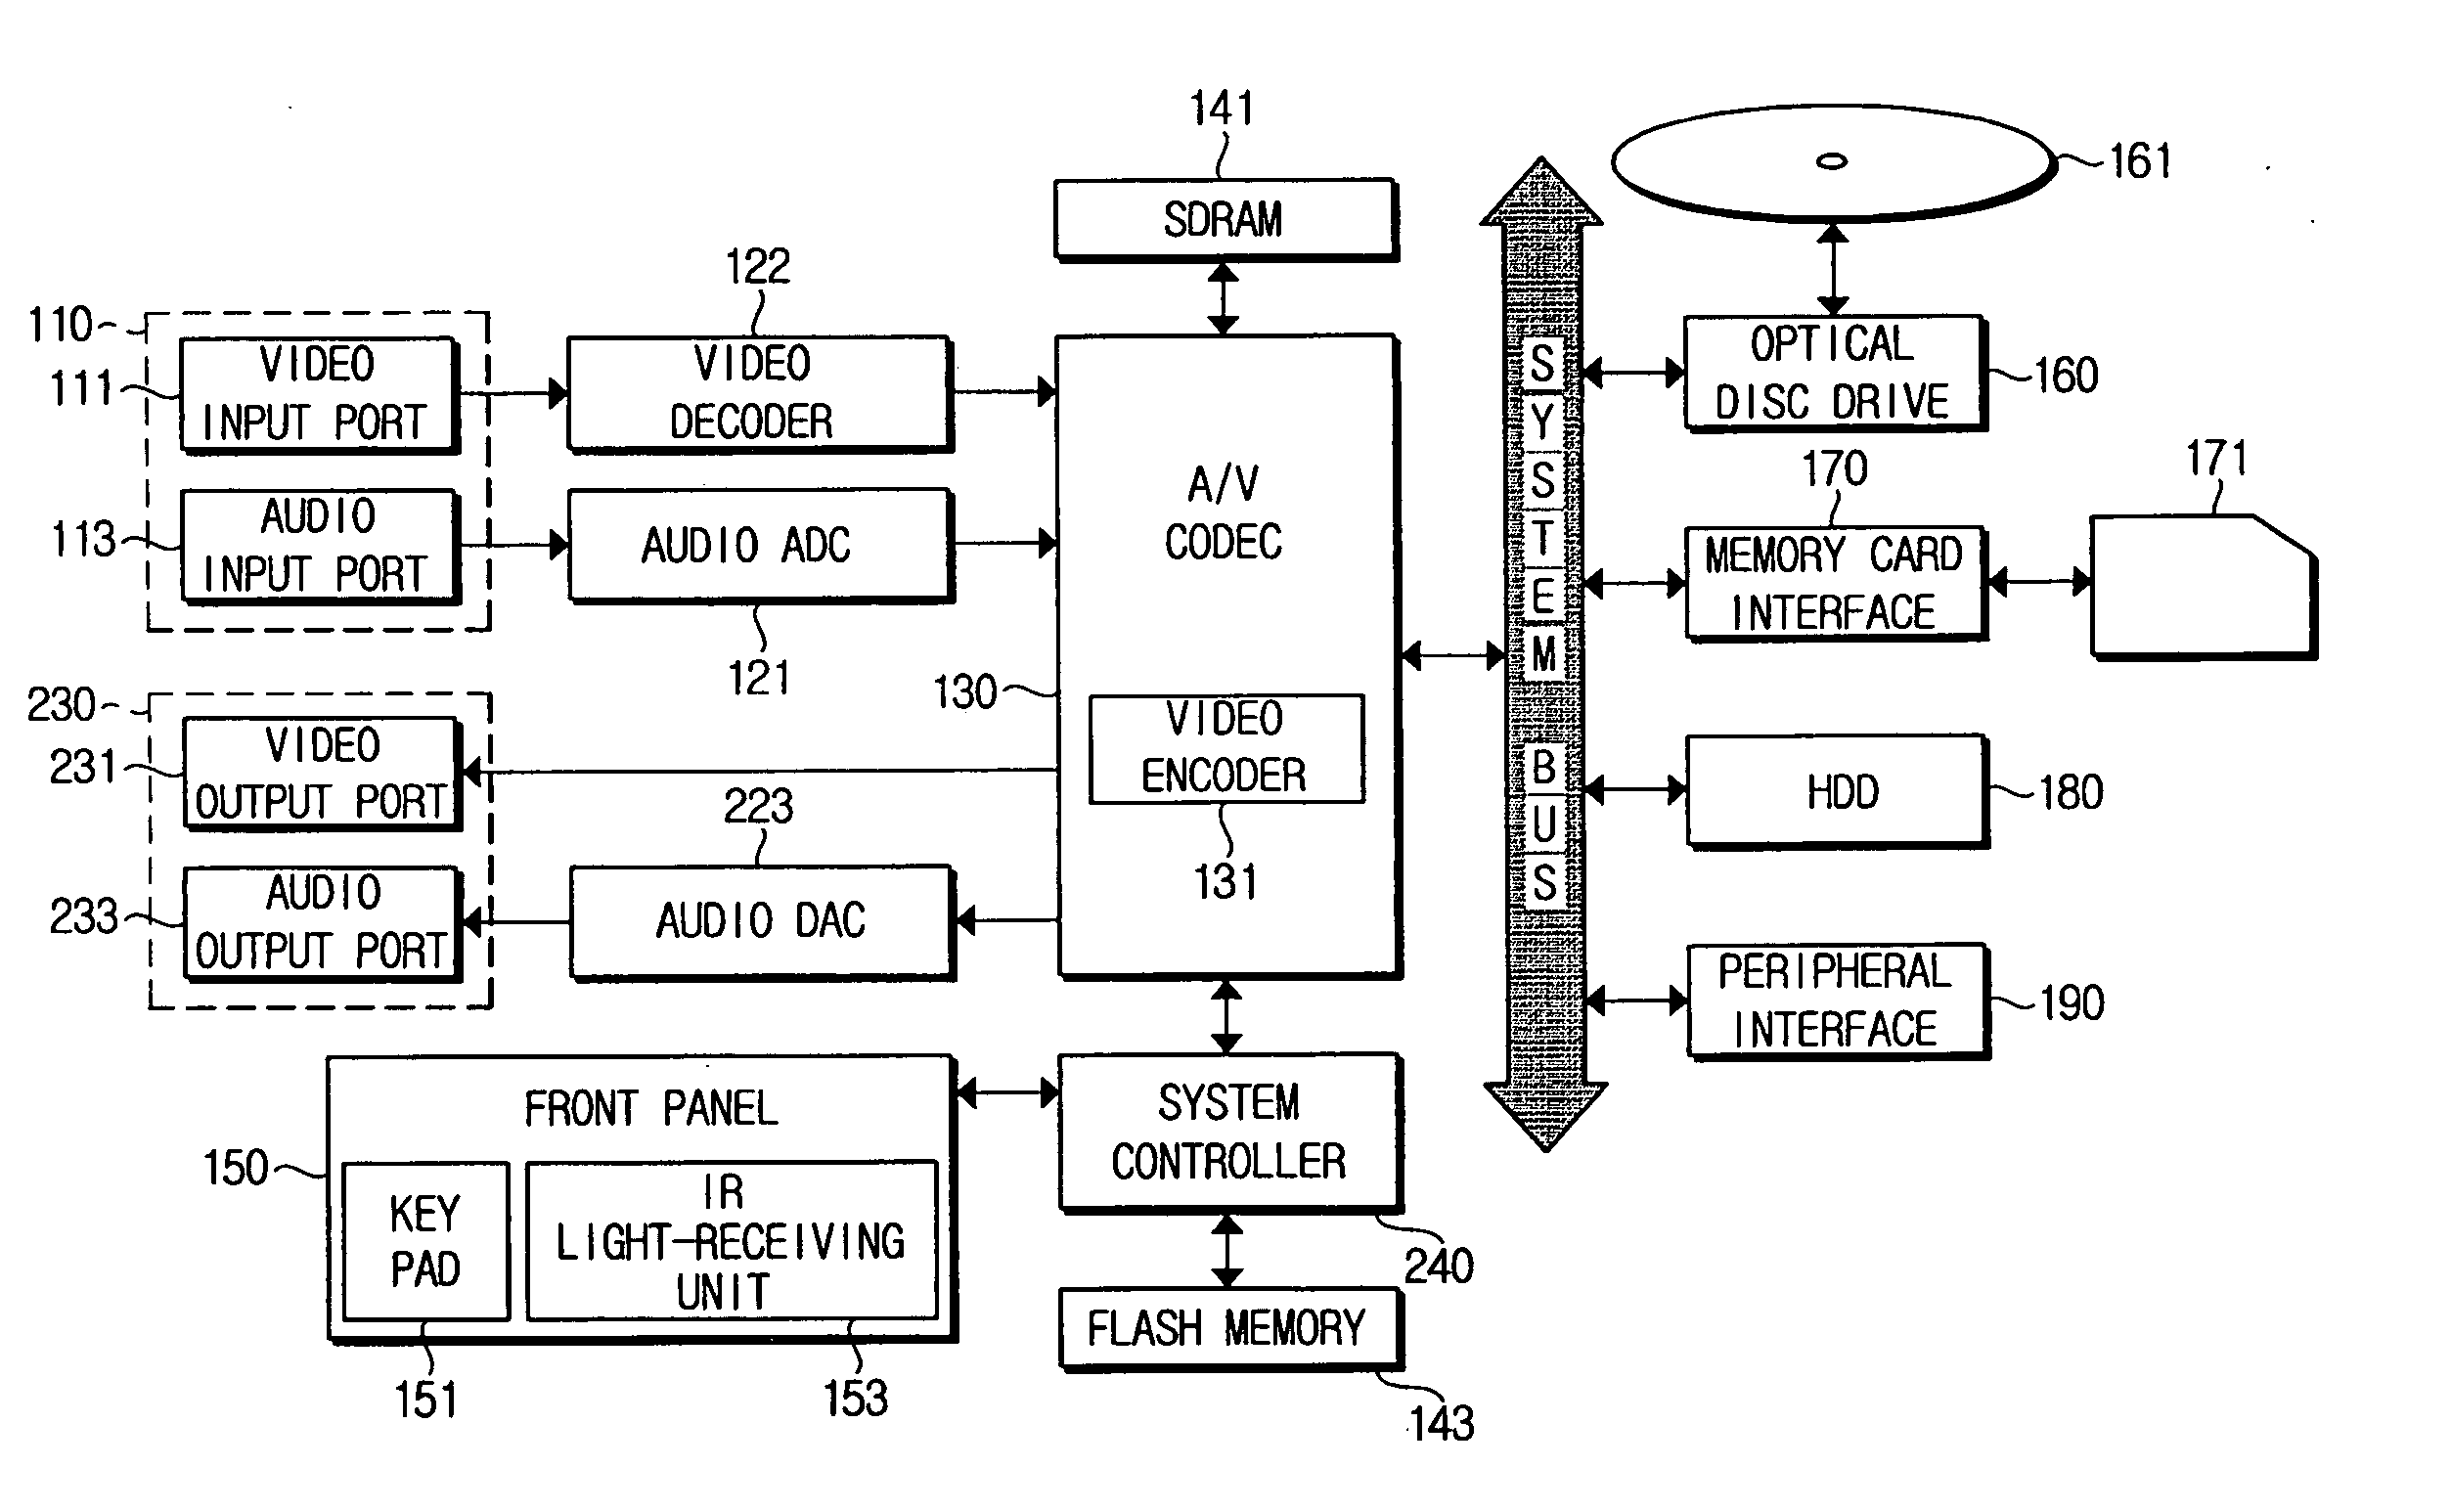 A/V recording and reproducing system using an A/V CODEC having a video encoder therein